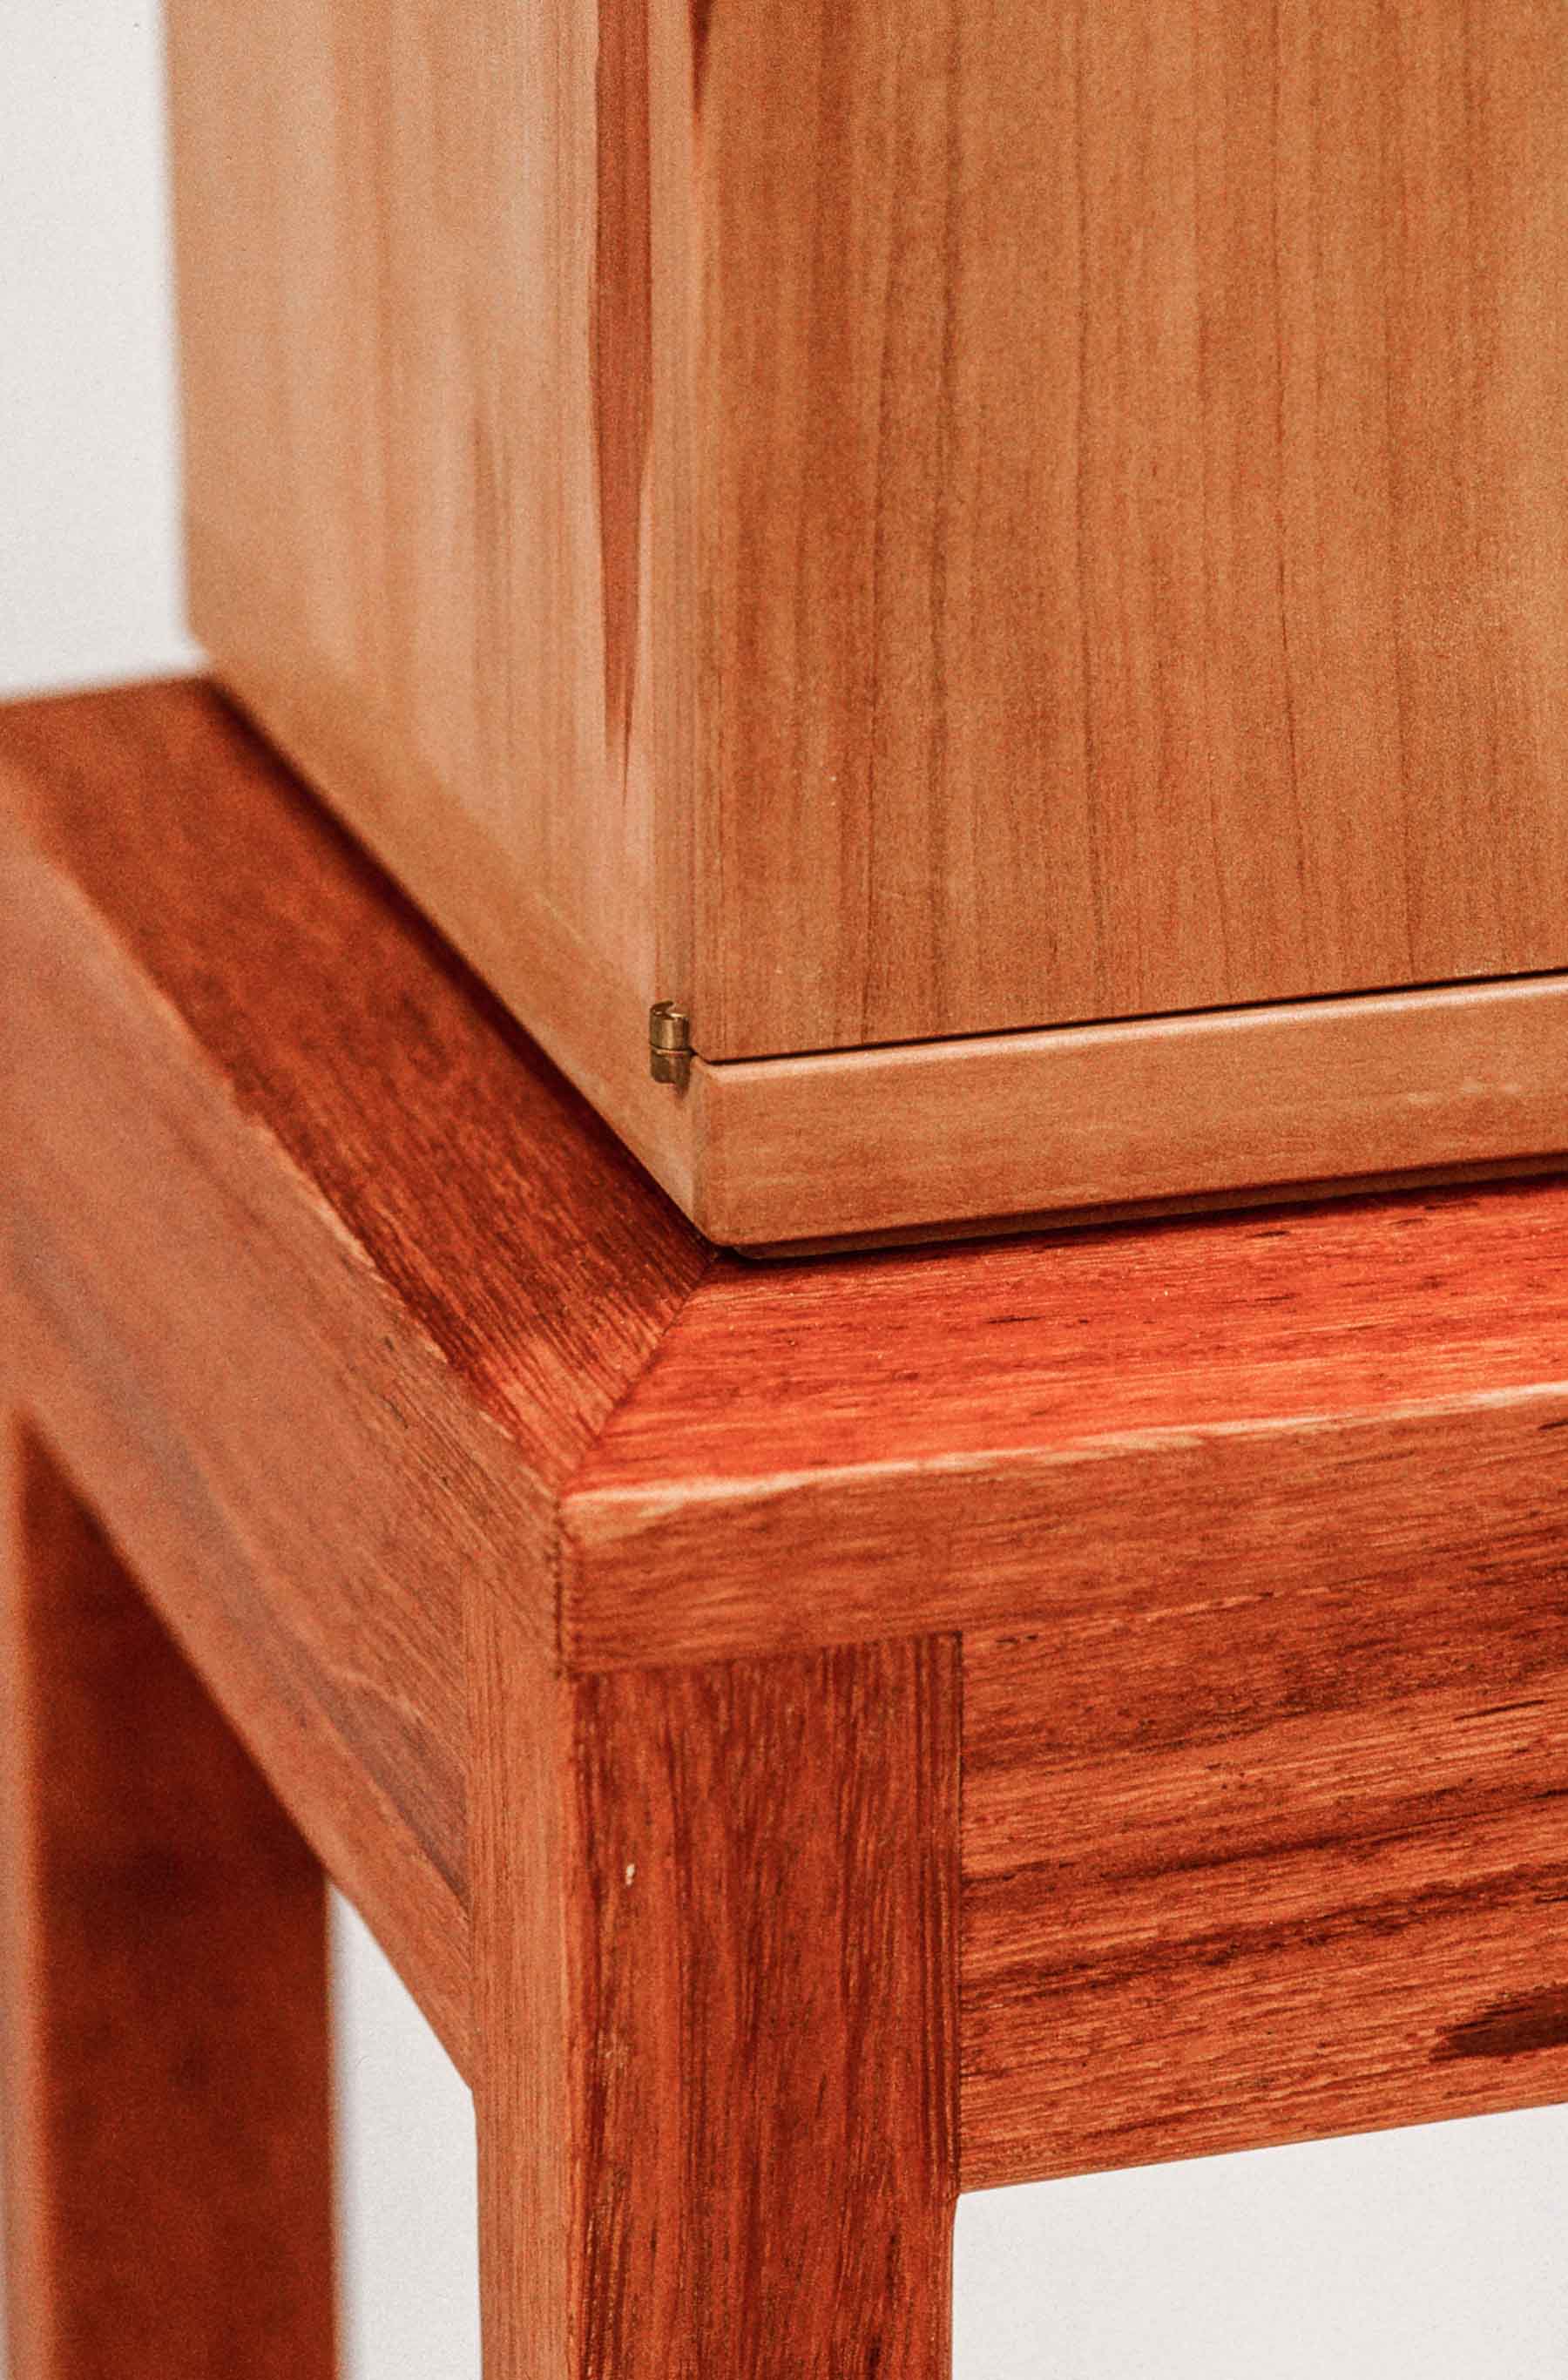 Cabinet in Unsteamed Pear Wood